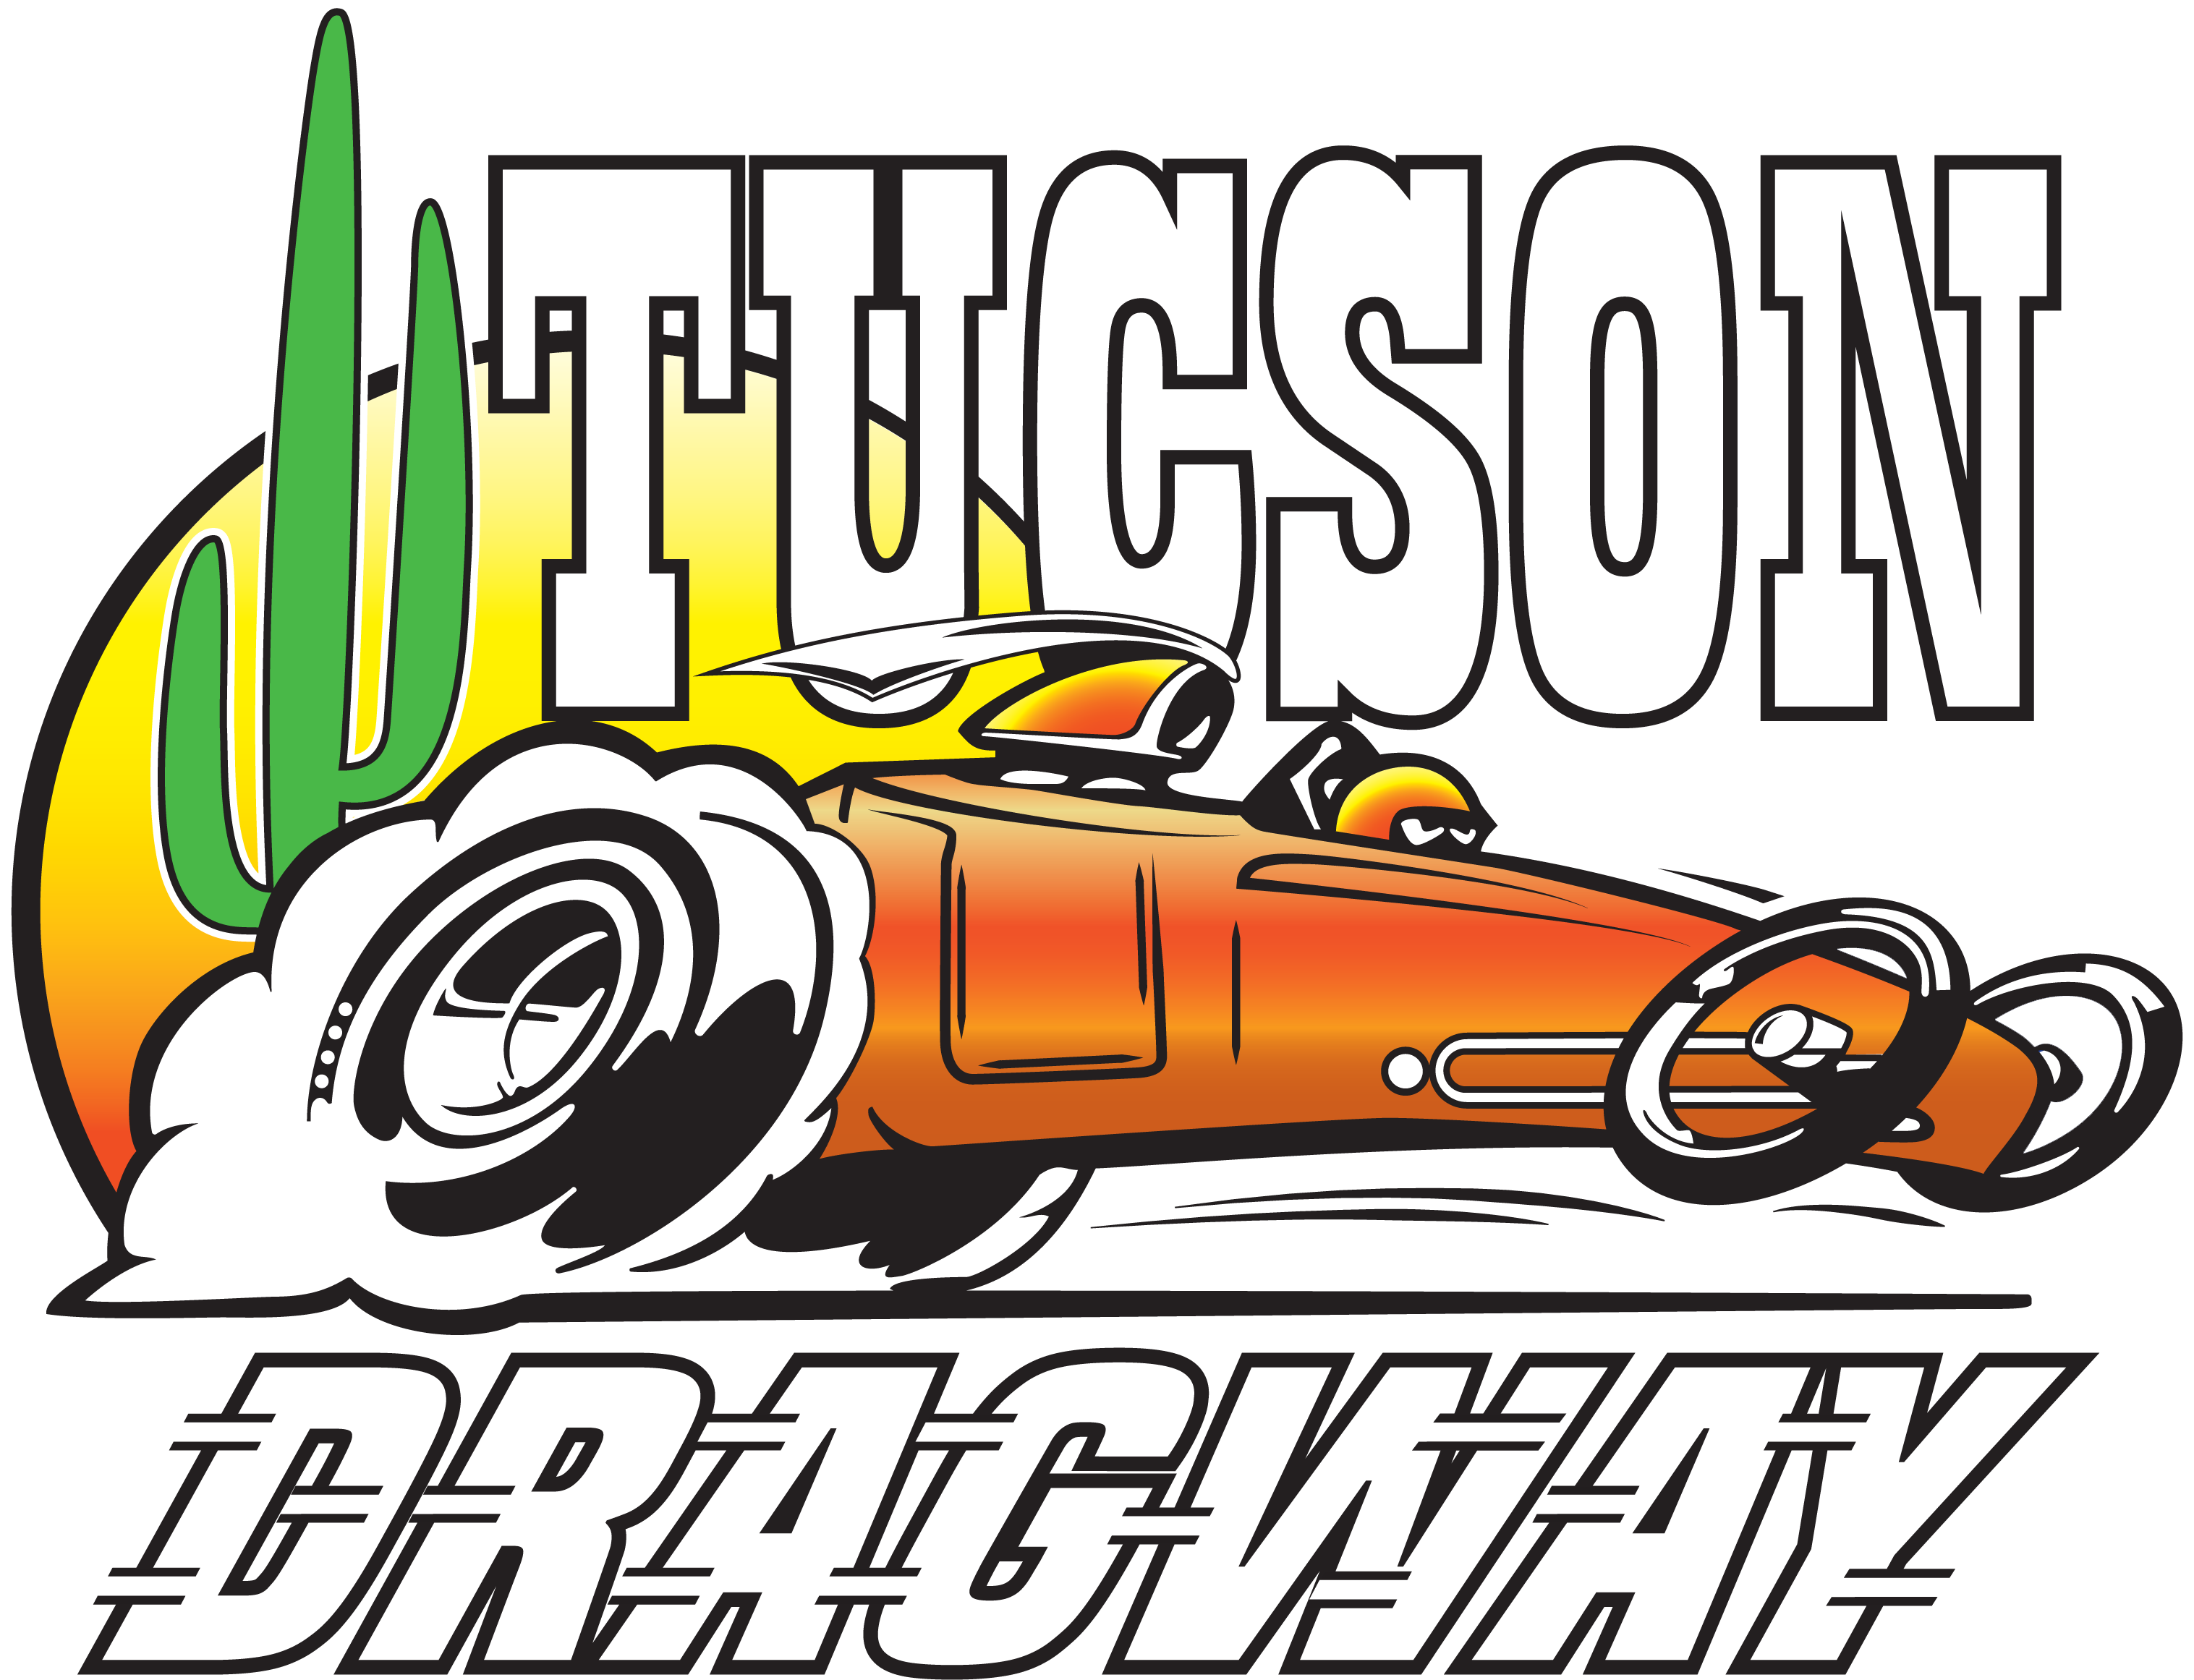 Other Companies Who Appreciate Quality - Tucson Dragway (3300x2550)